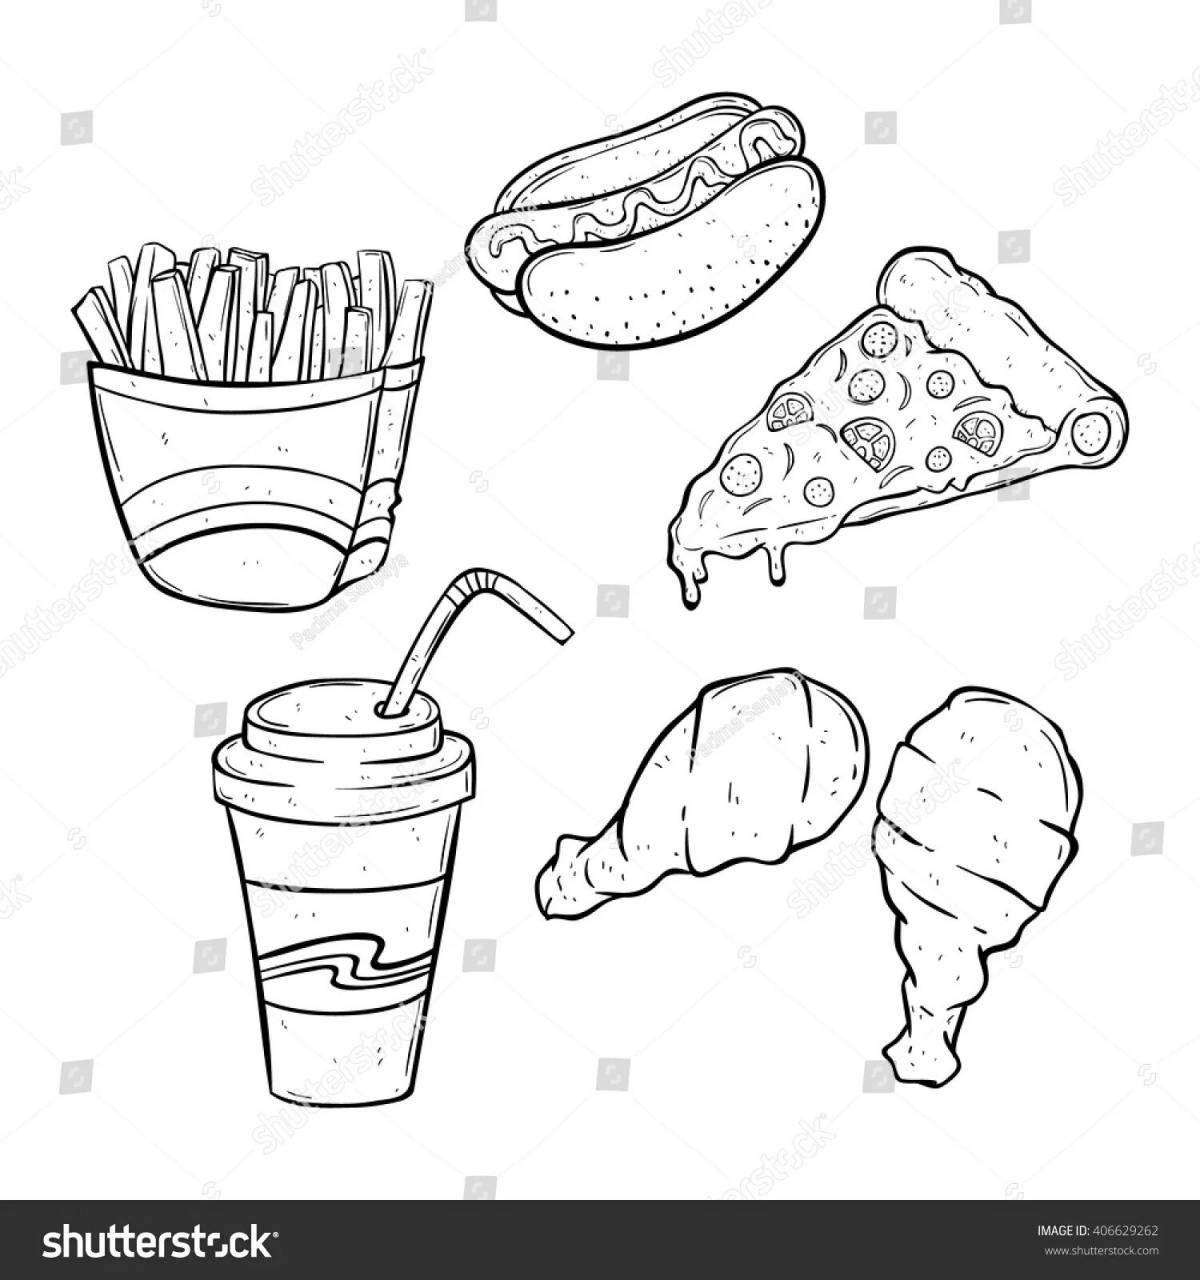 Coloring page attractive harmful foods